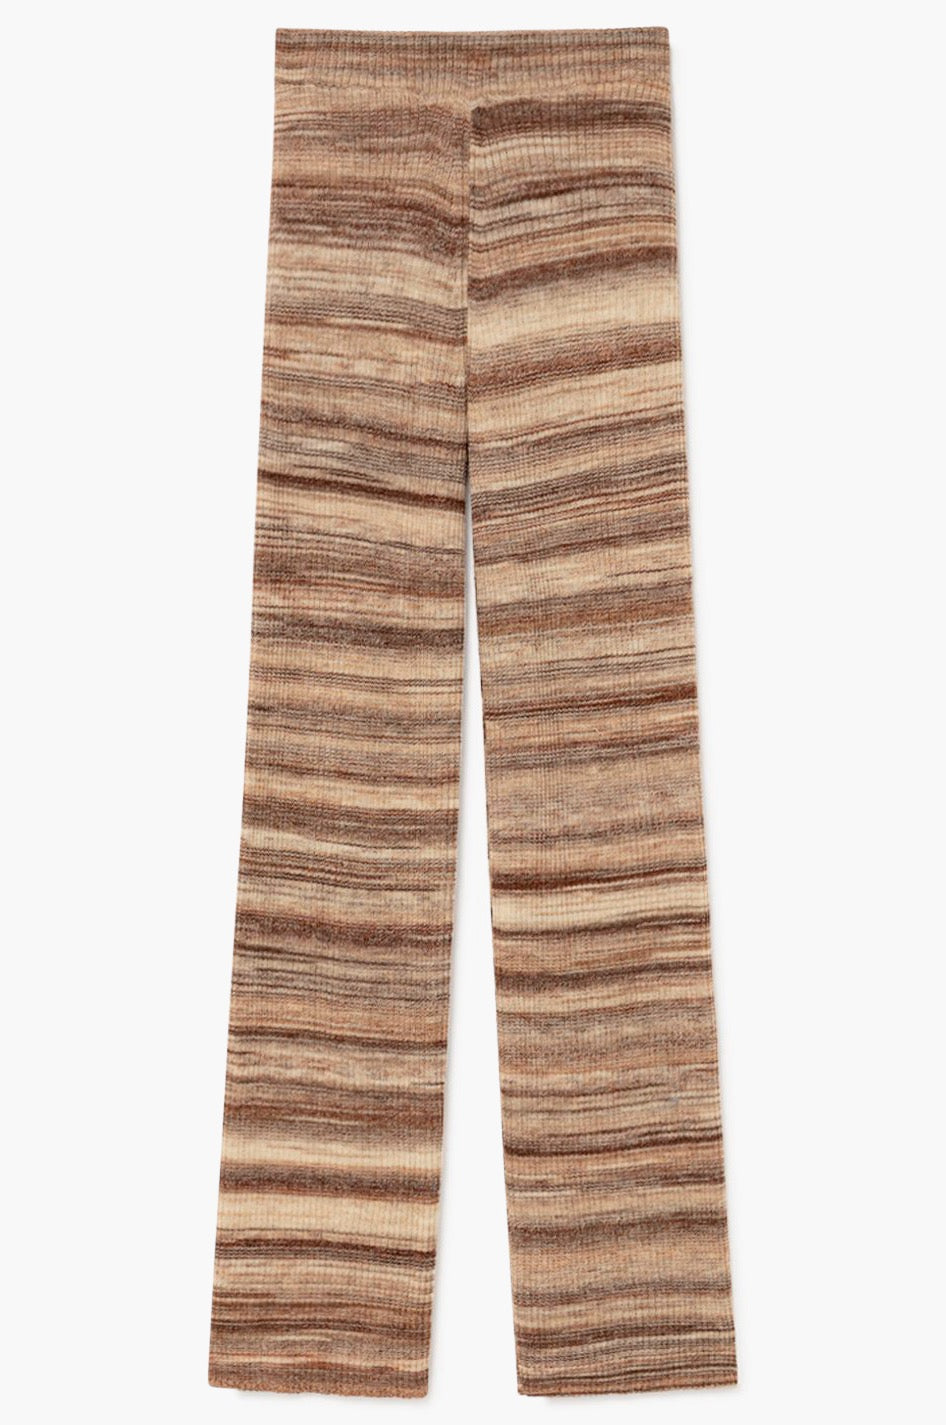 Fabia Ribbed Knit Pants - Light Brown